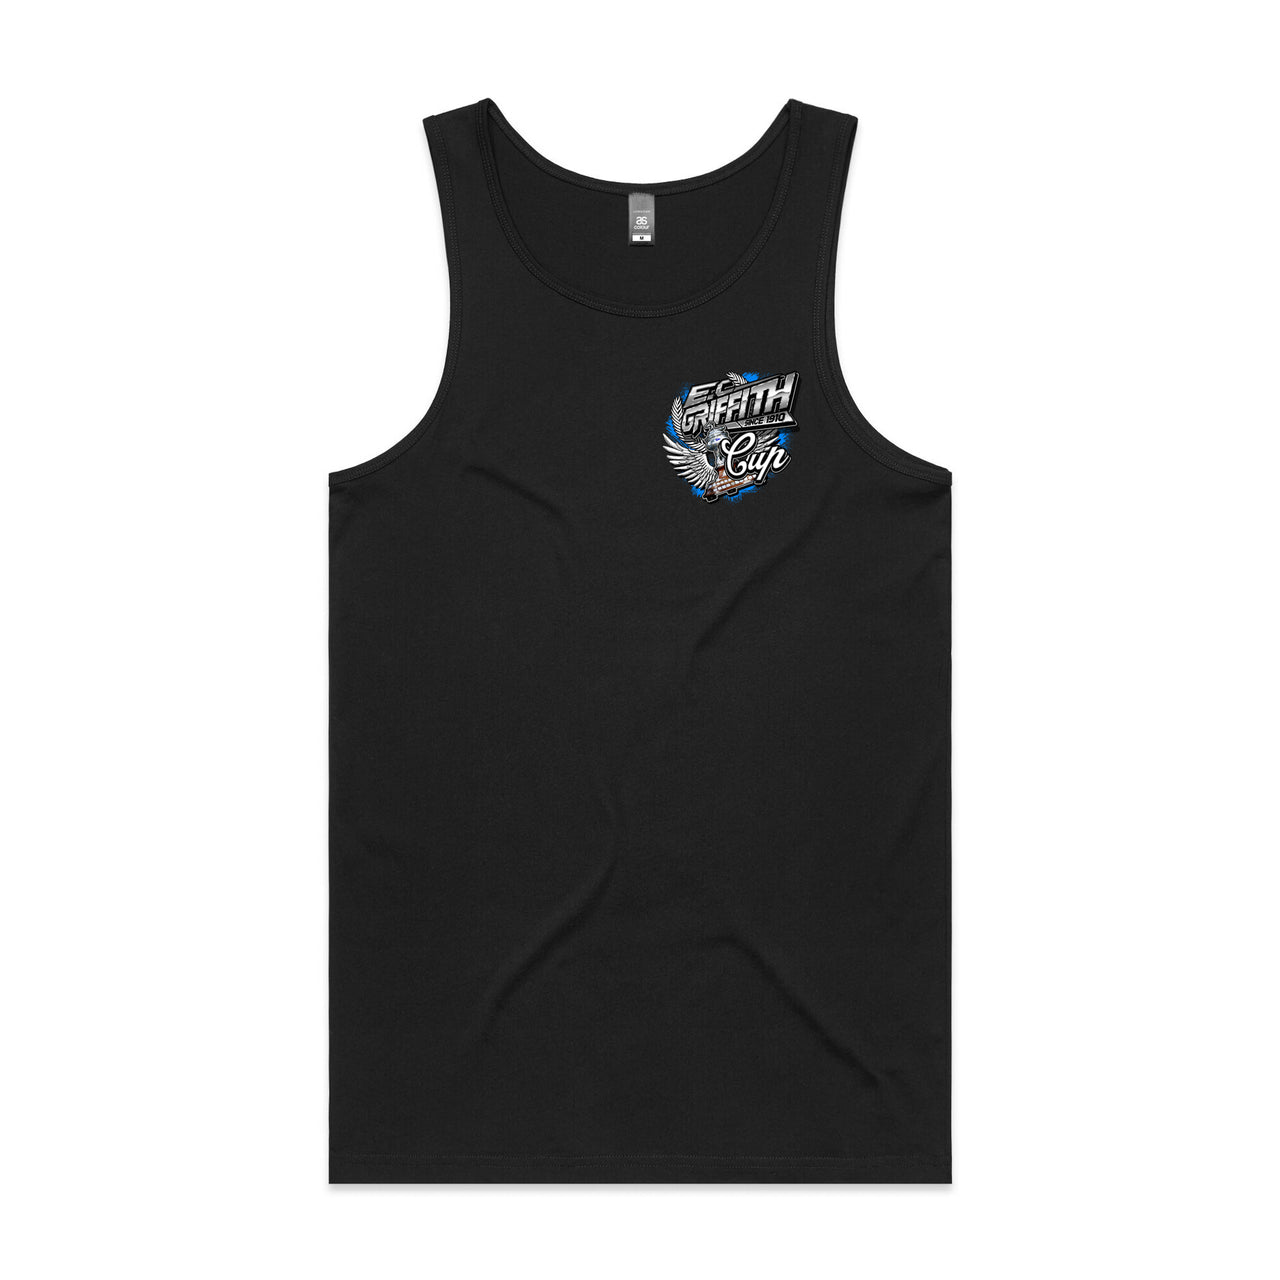 E.C Griffith Cup 2022 Event Singlet